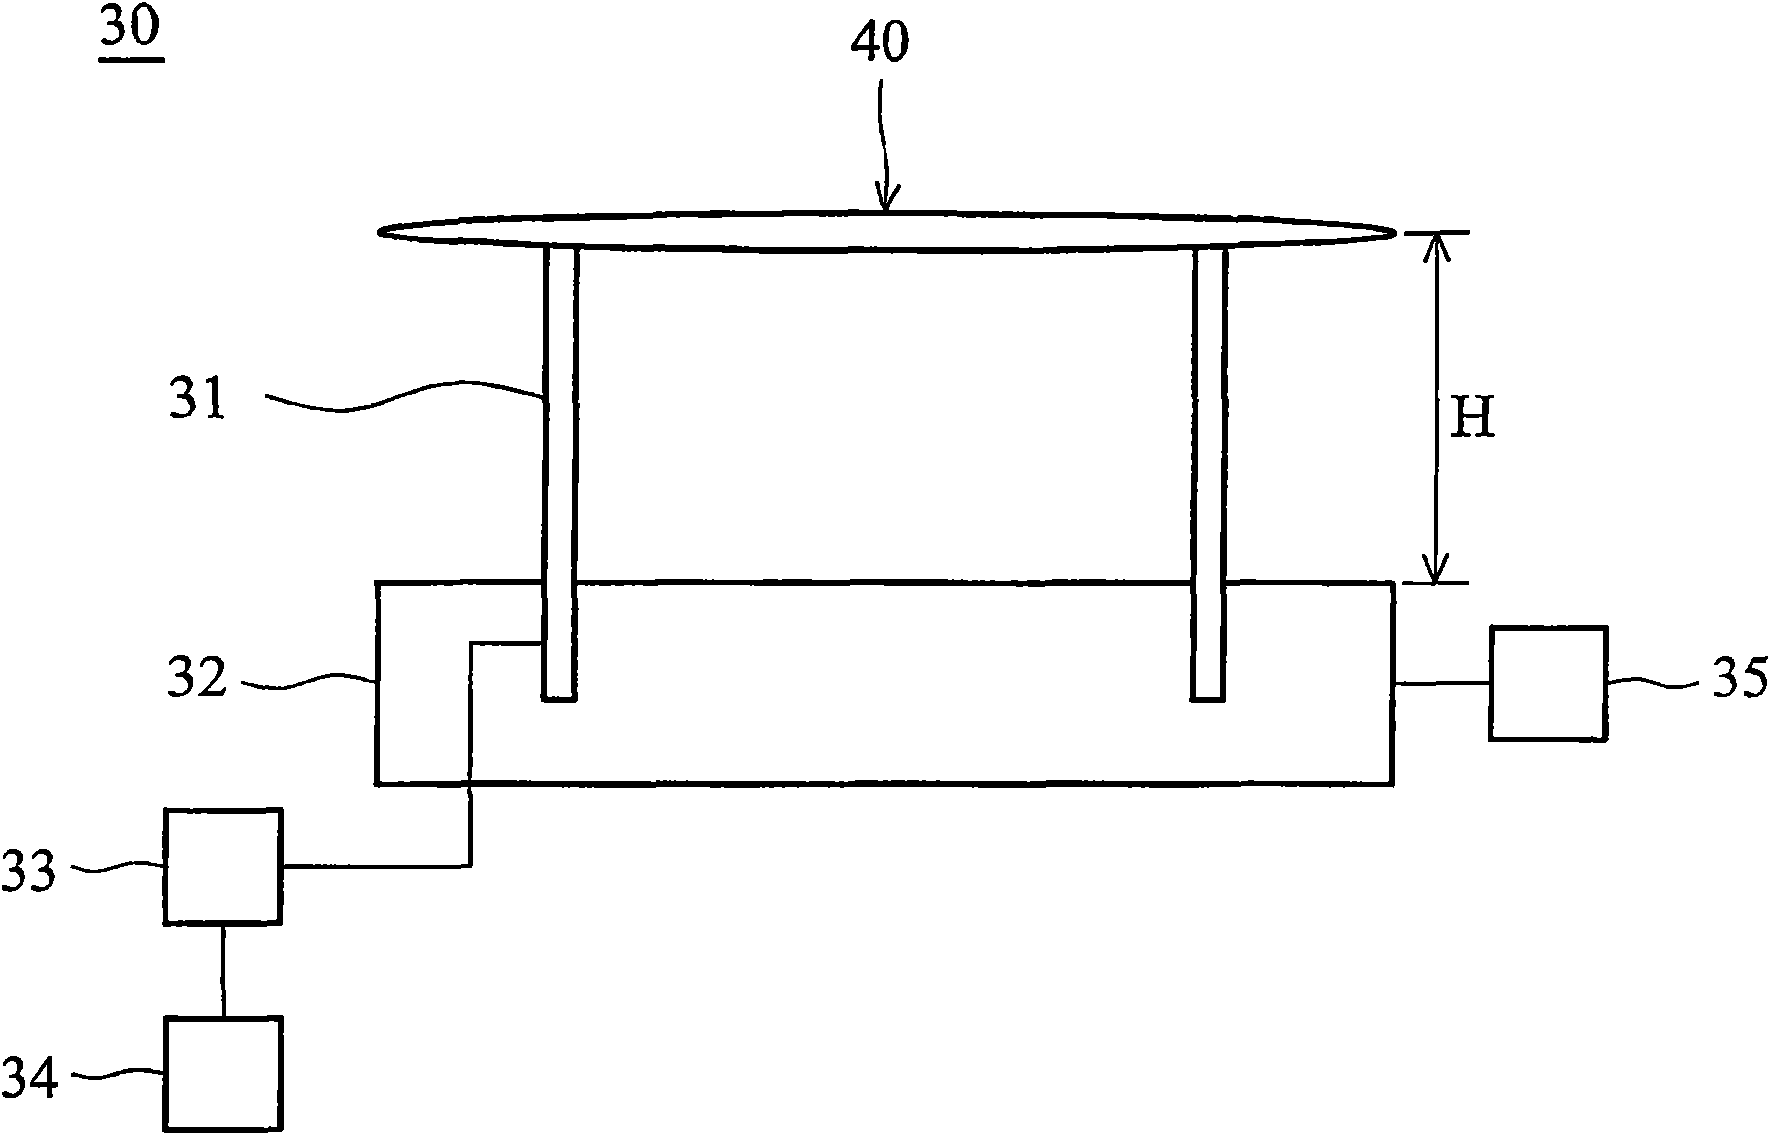 Photoresist removing machine station and photoresist removing process